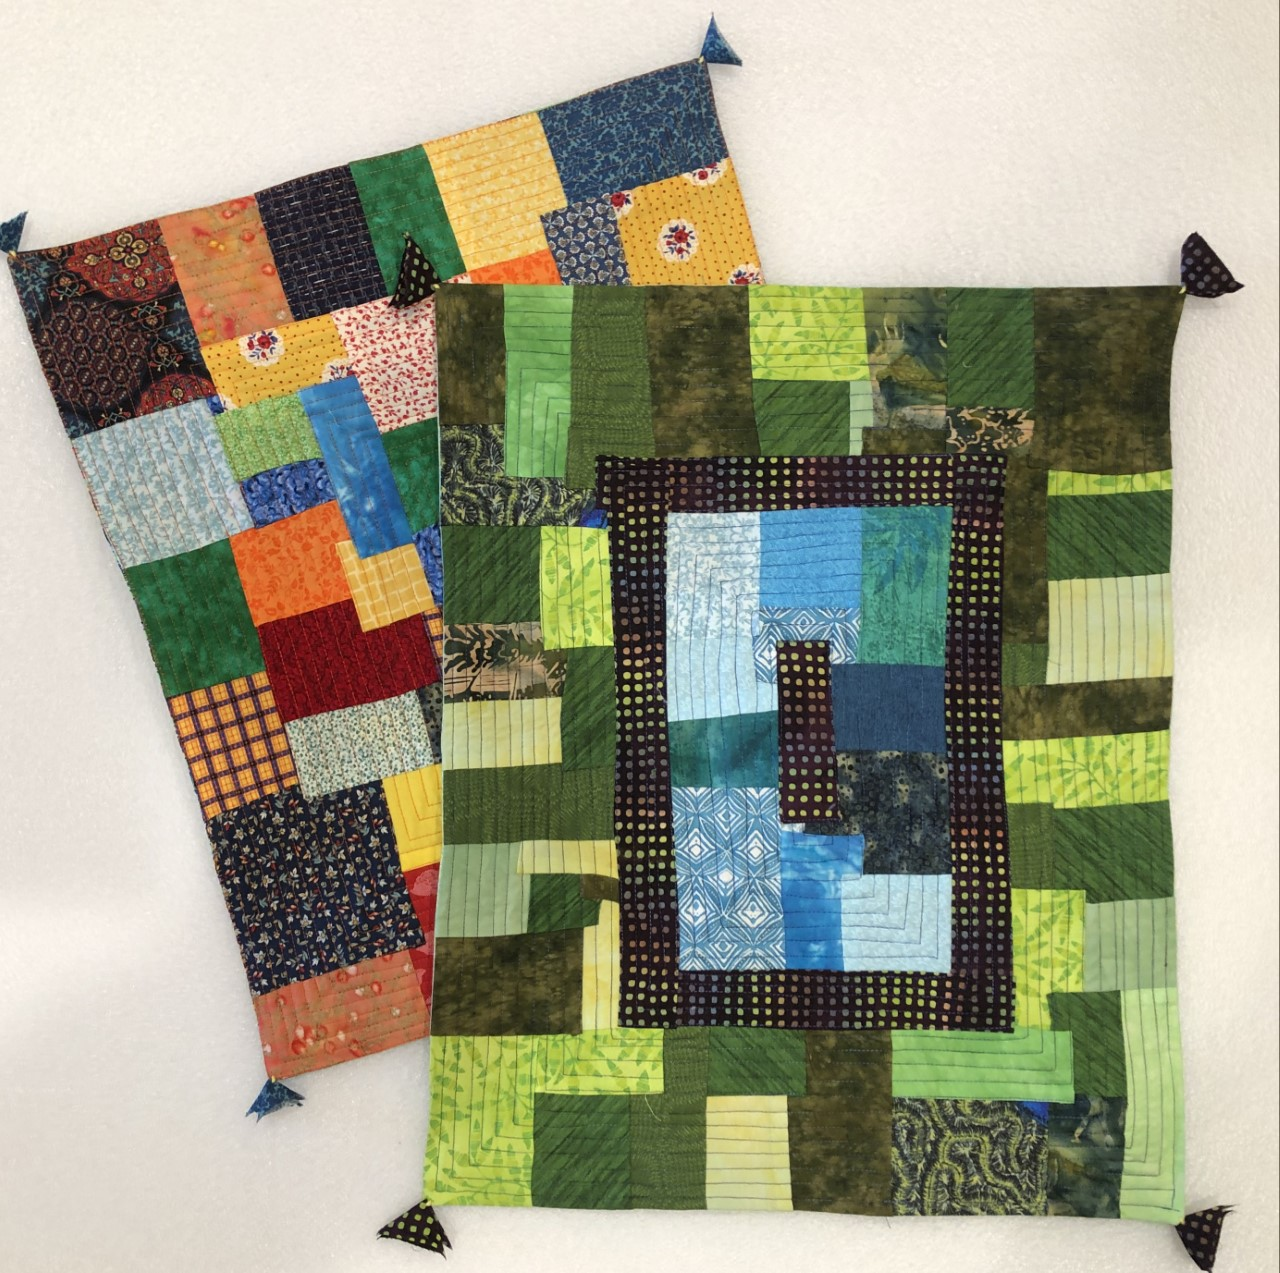 Featured image for “Machine Stitched Kawandi-Style Quilts”